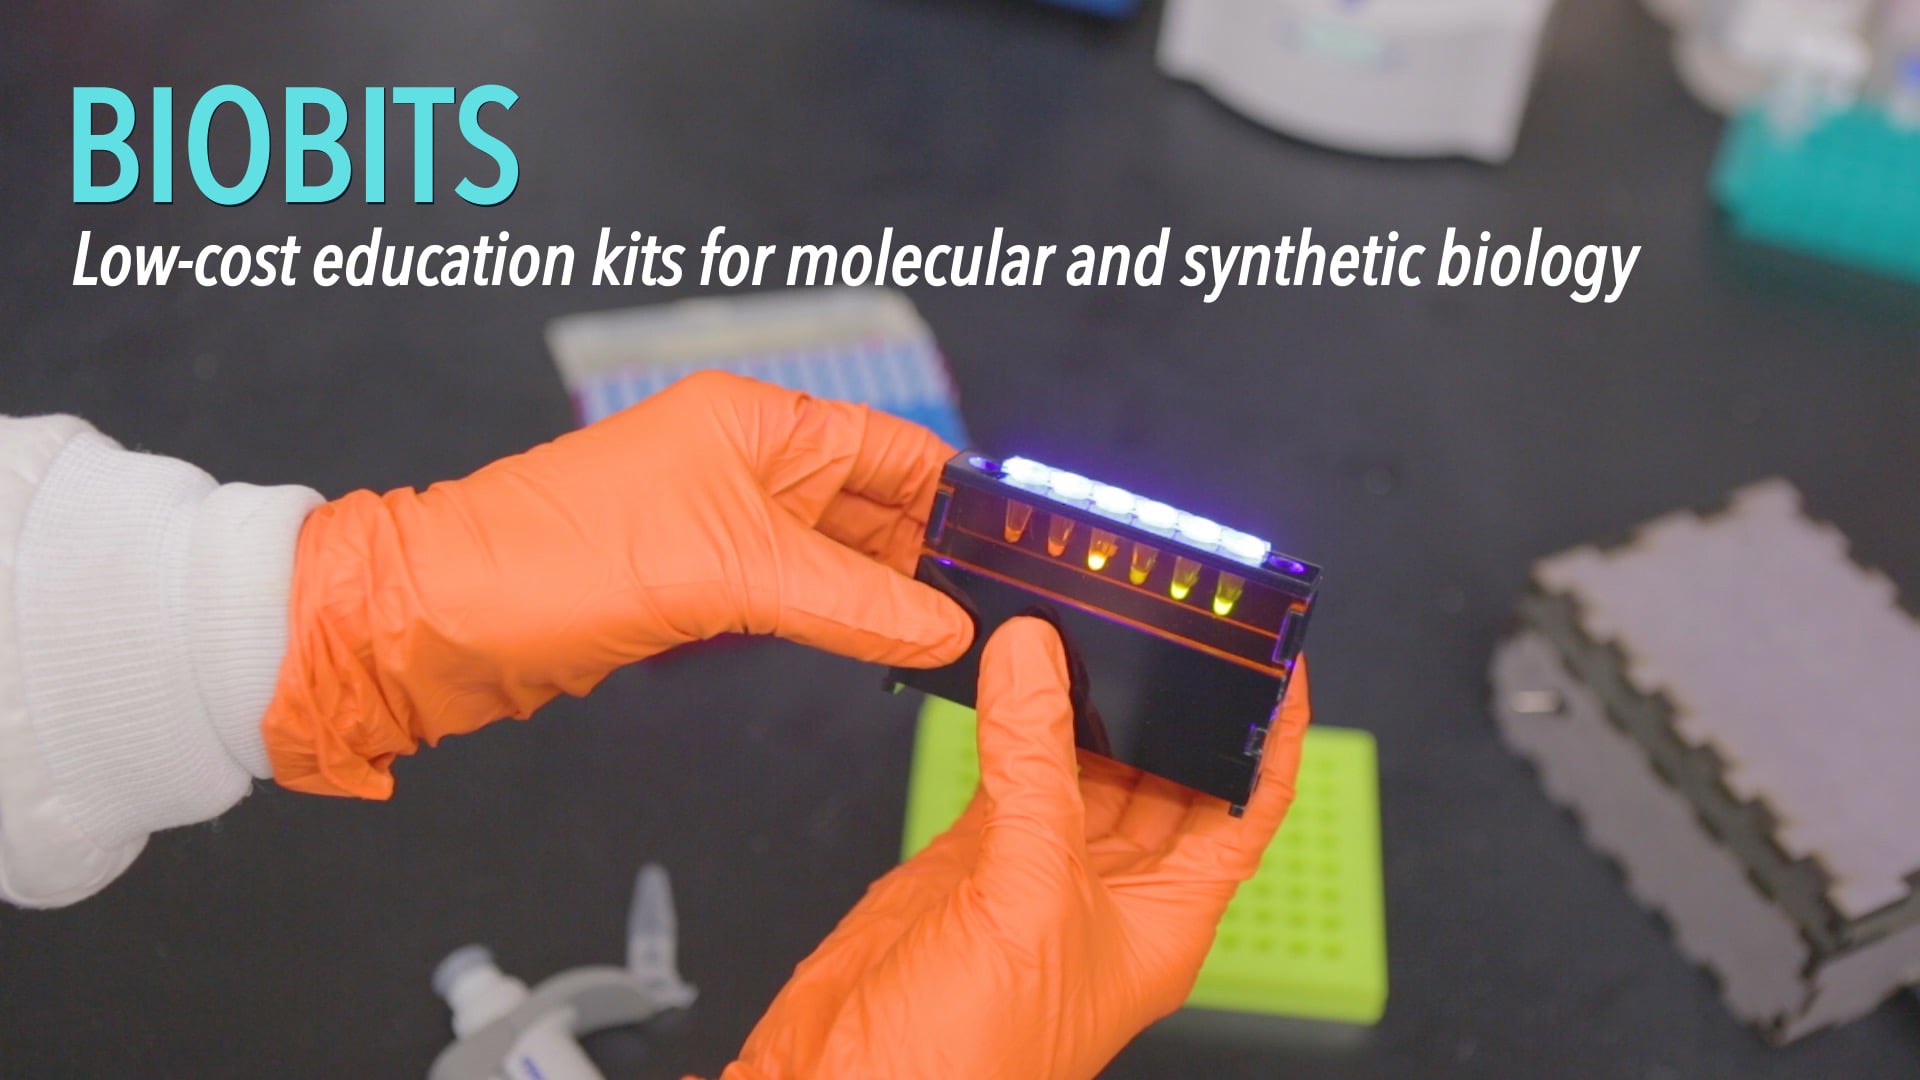 BioBits: Low-cost education kits for molecular and synthetic biology